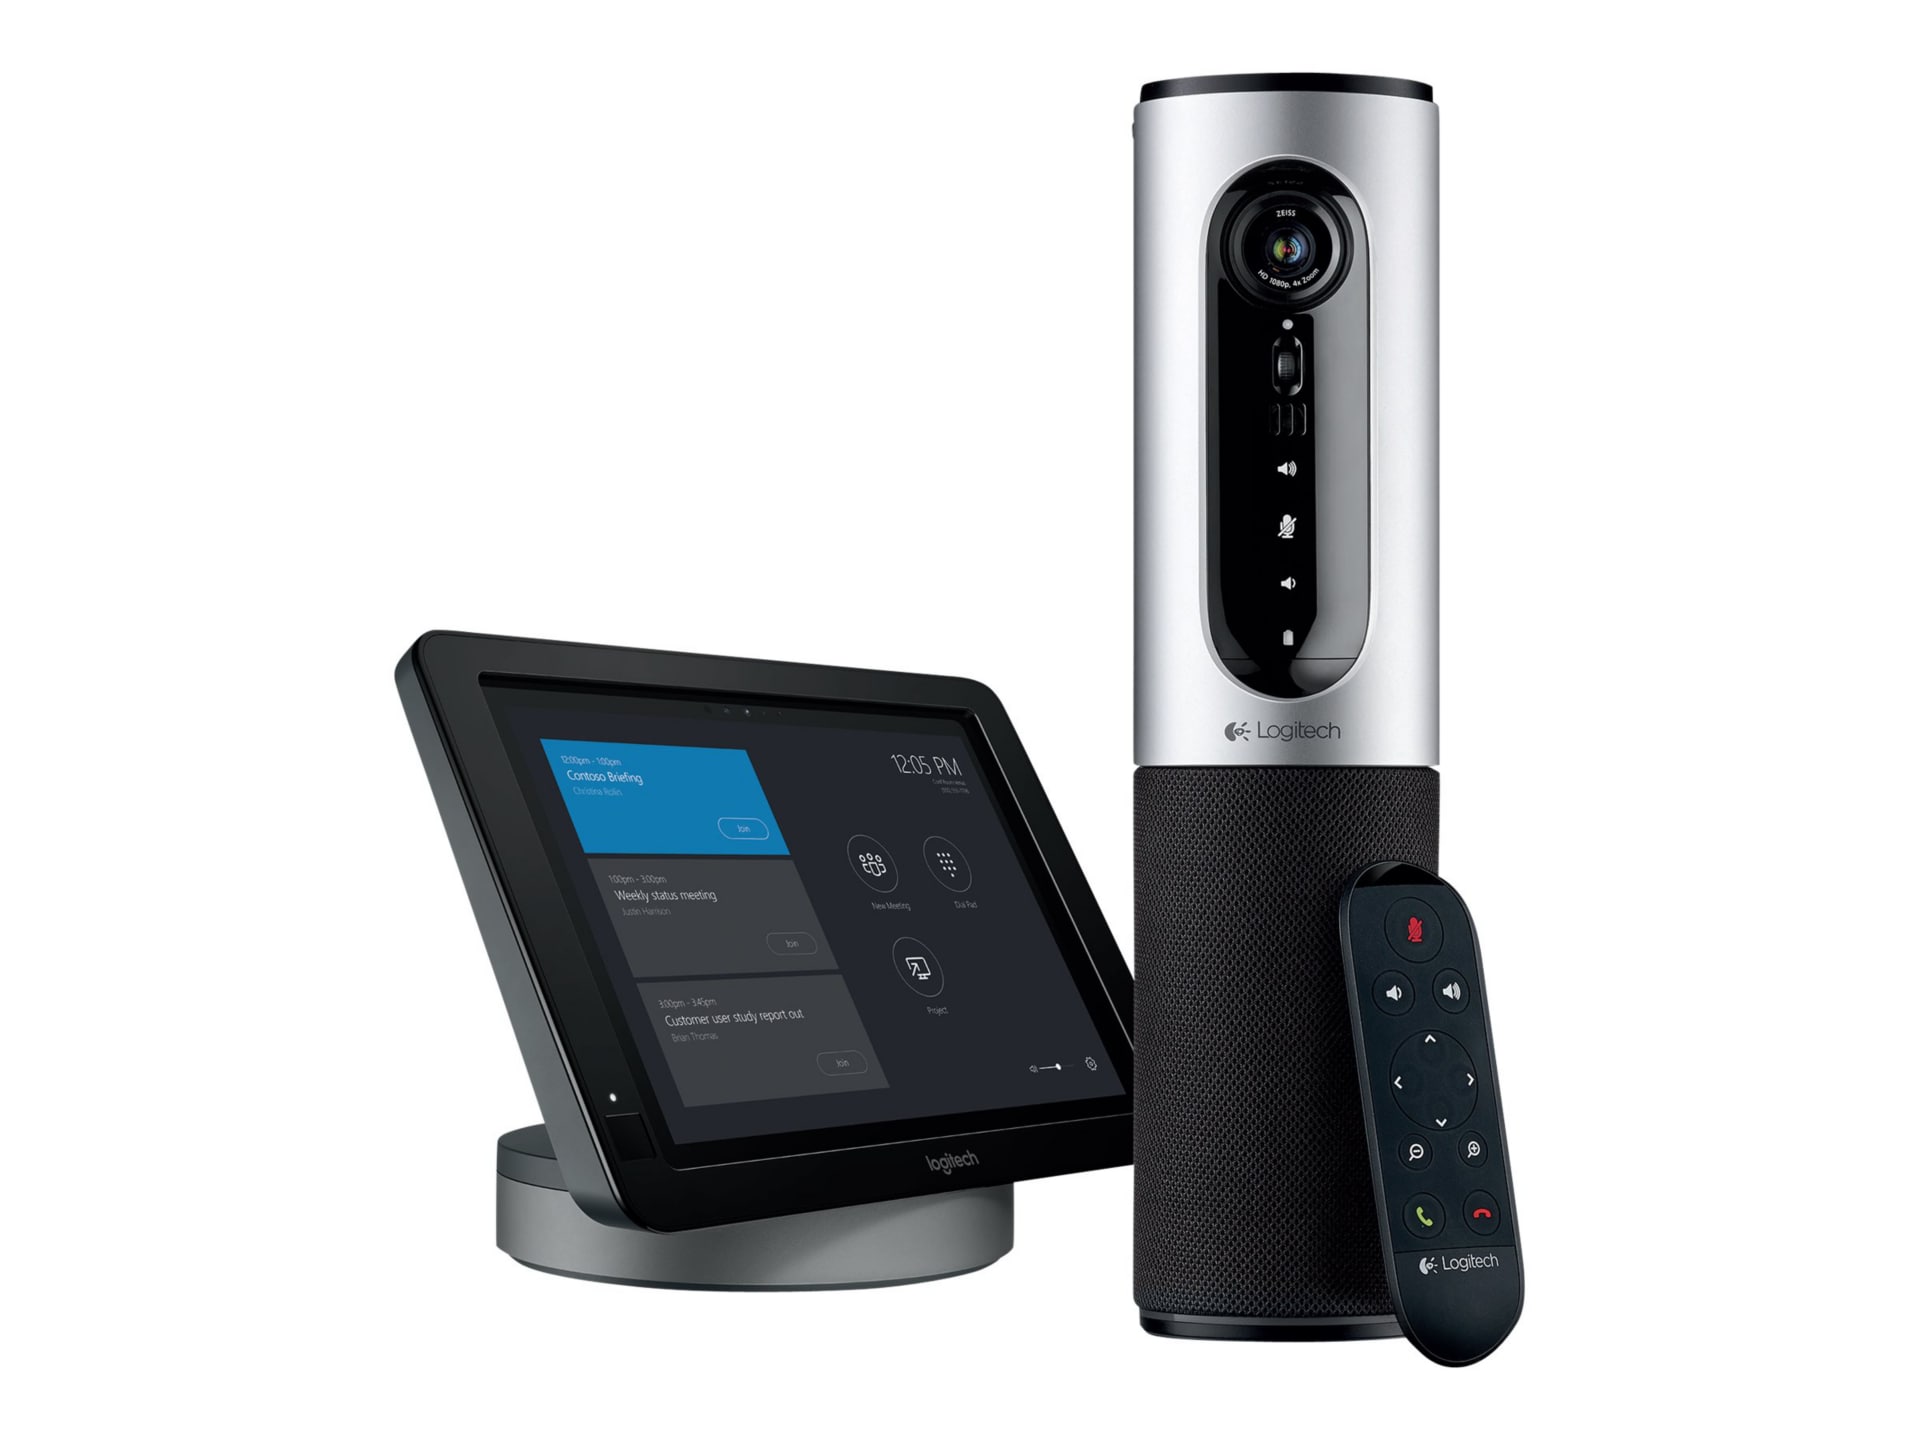 Logitech SmartDock Small Skype Room System - video conferencing kit - with Surface Pro 4 (i5, 128GB, 4GB), ConferenceCam